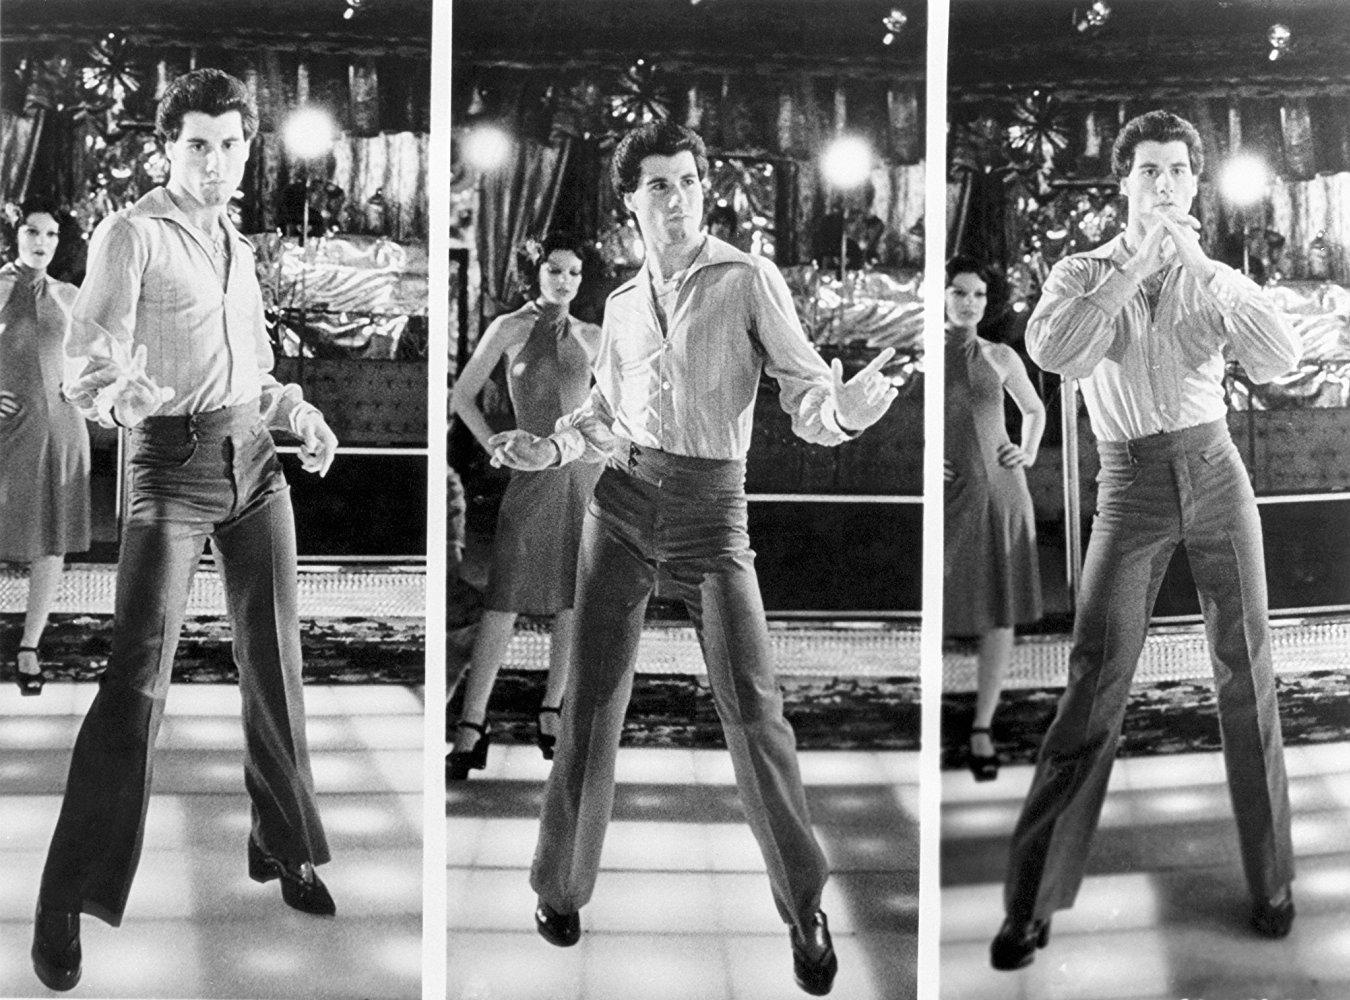 Image gallery for Saturday Night Fever.